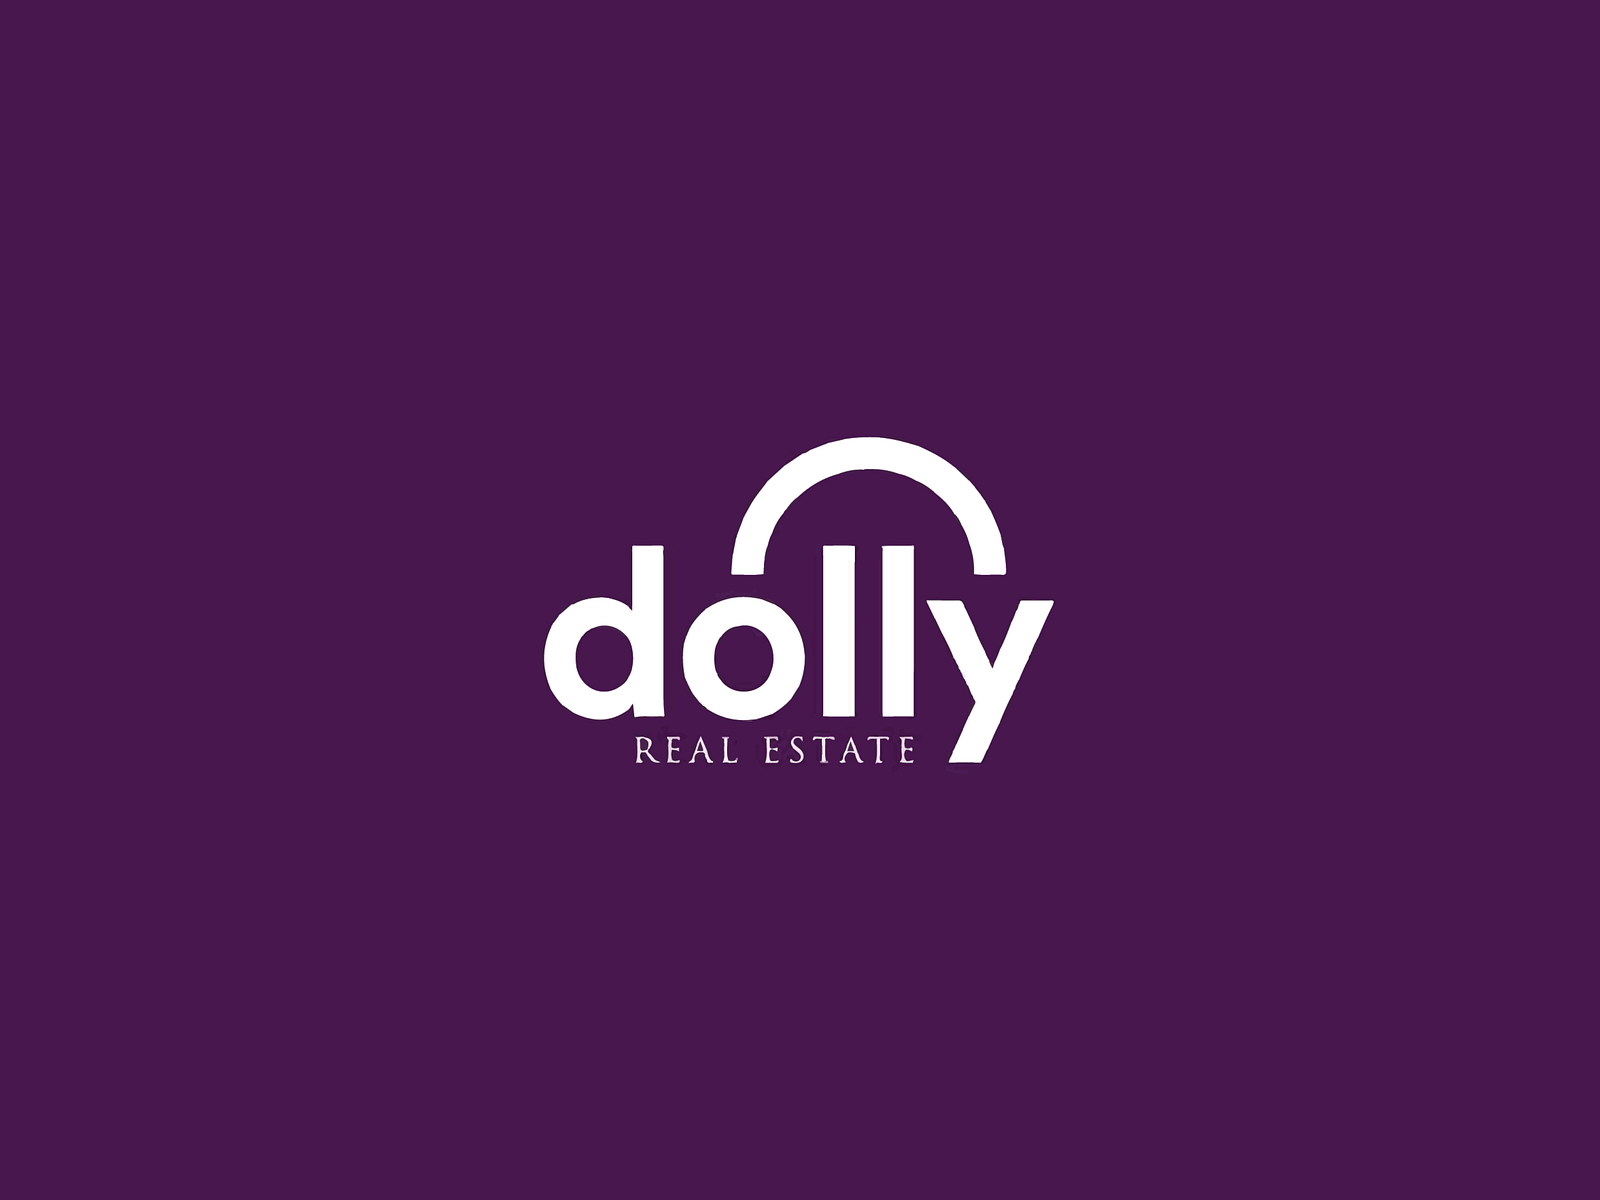 Brand Mockup - Dolly Real Estate by Cubicspace on Dribbble